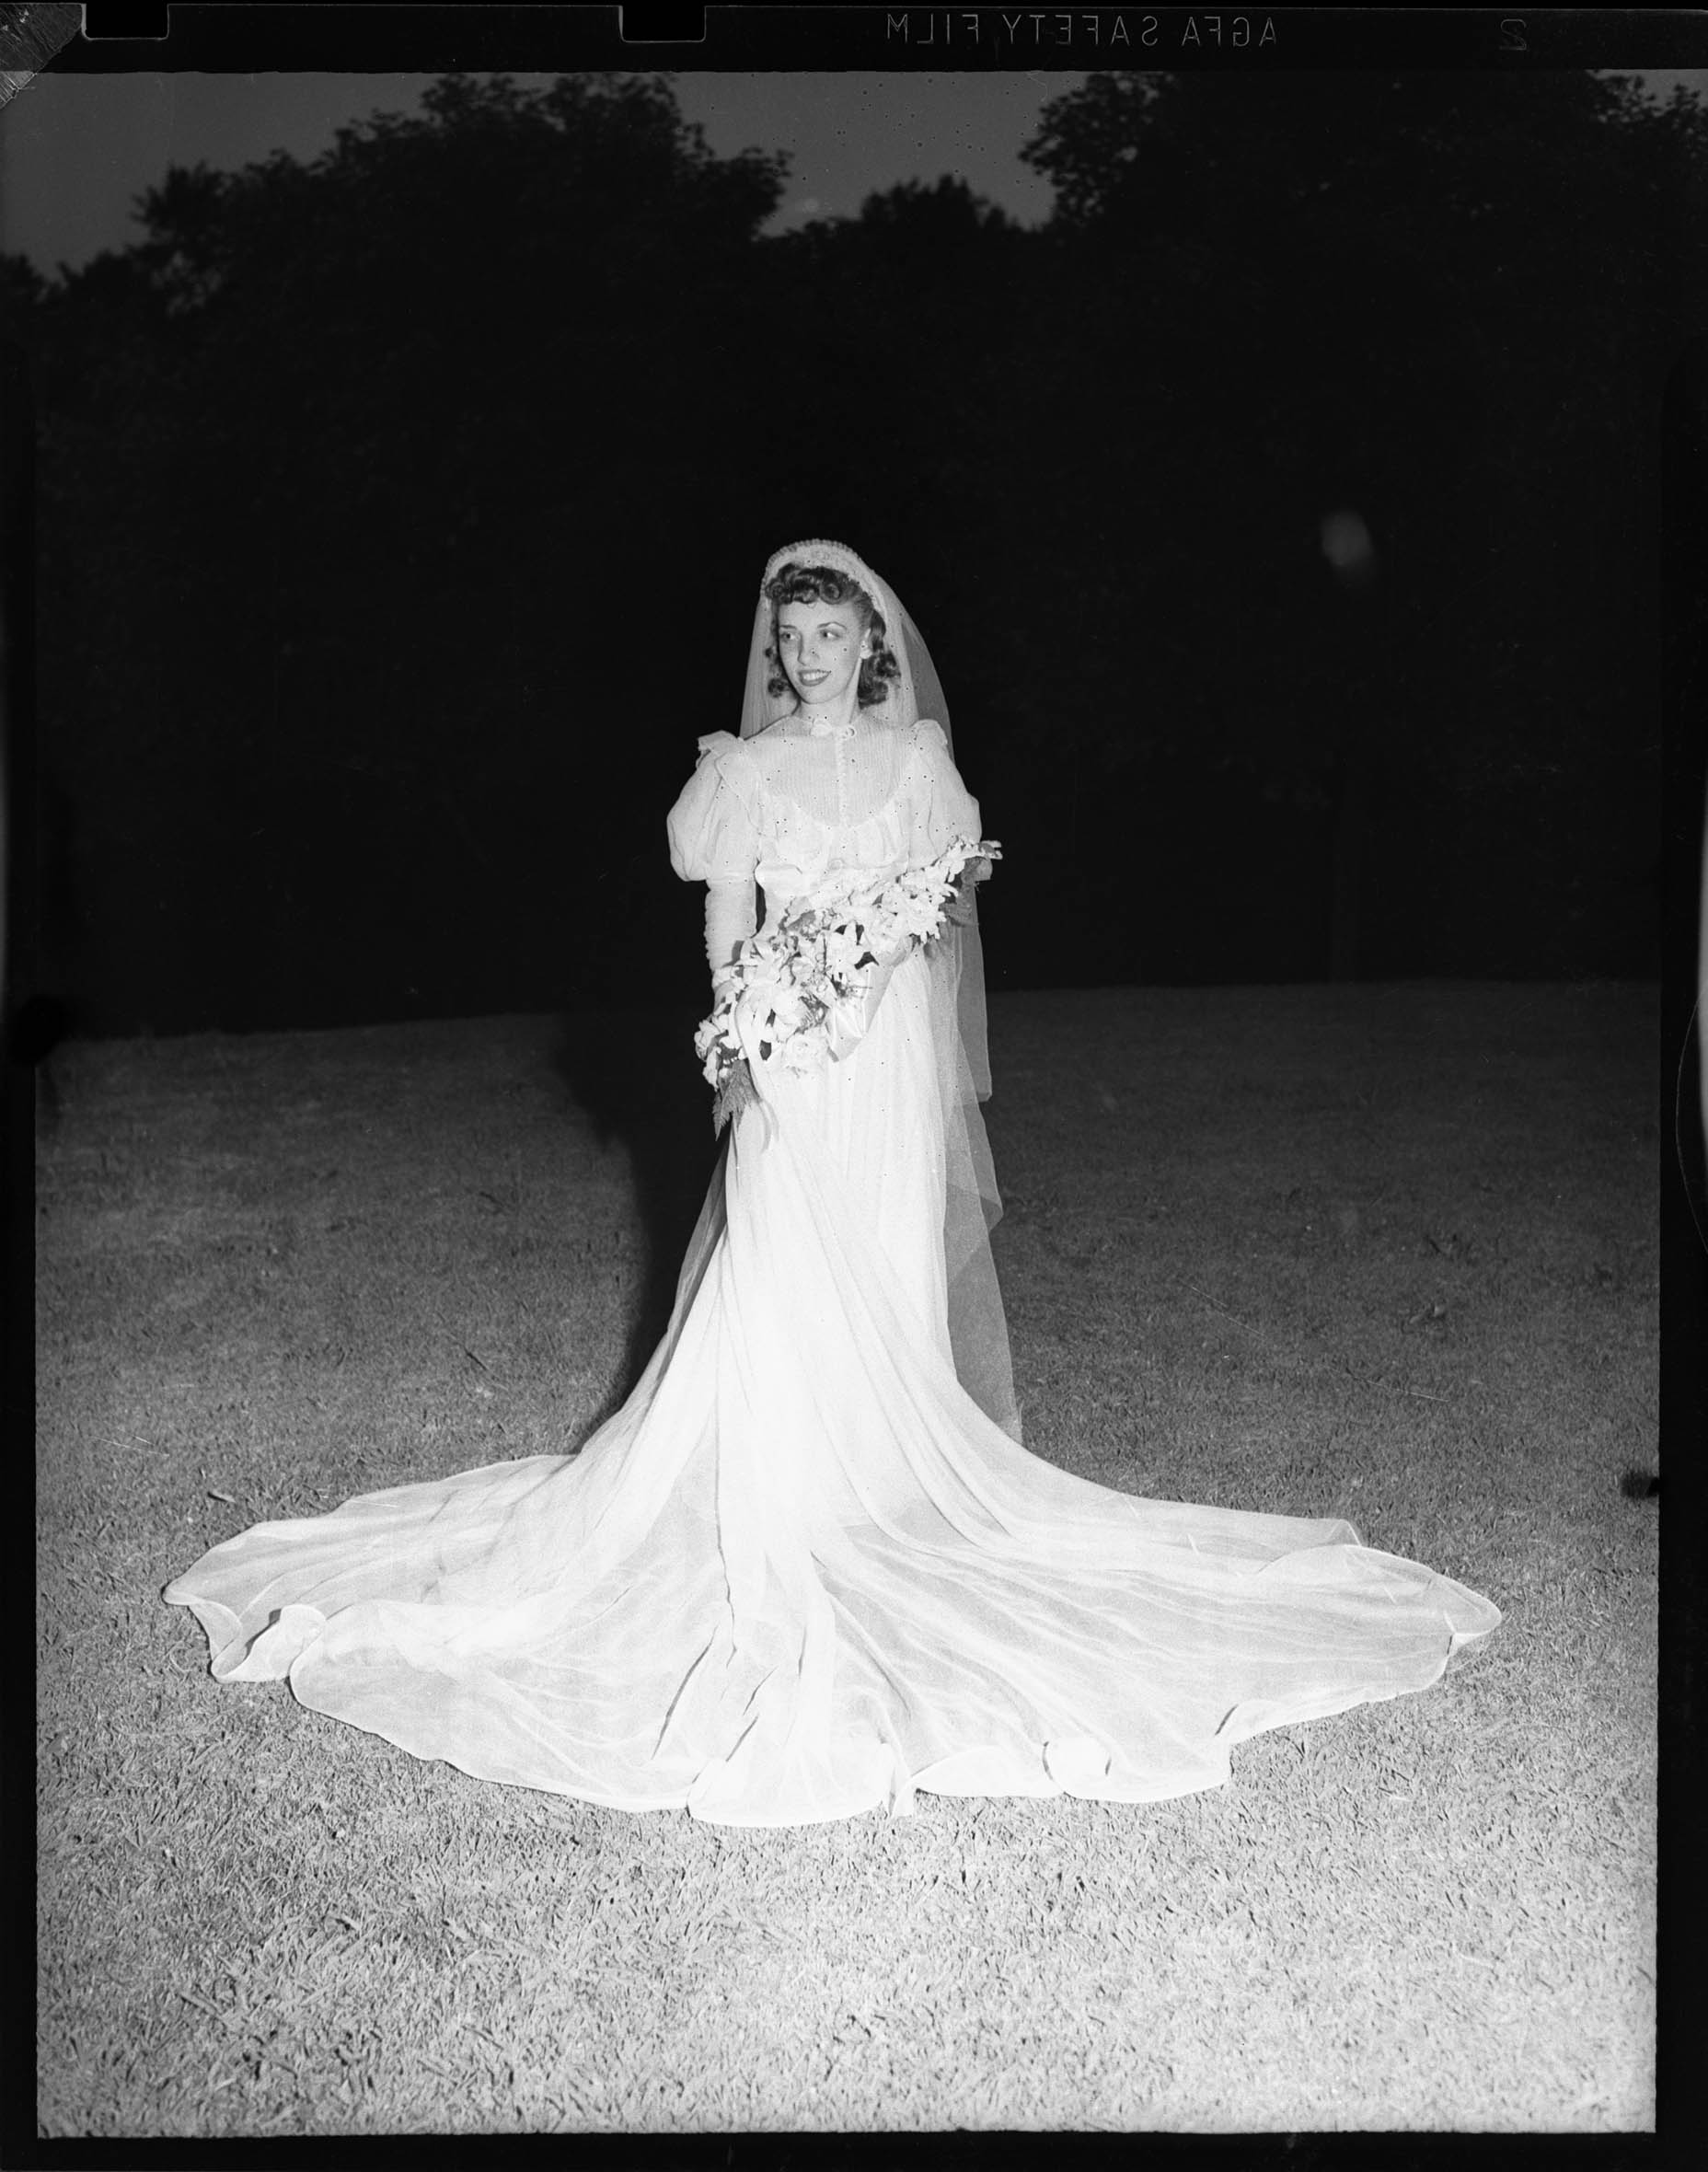 Portrait of a woman in a long wedding dress, which falls to the ground and fans out around her. She is holding a bouquet of flowers.